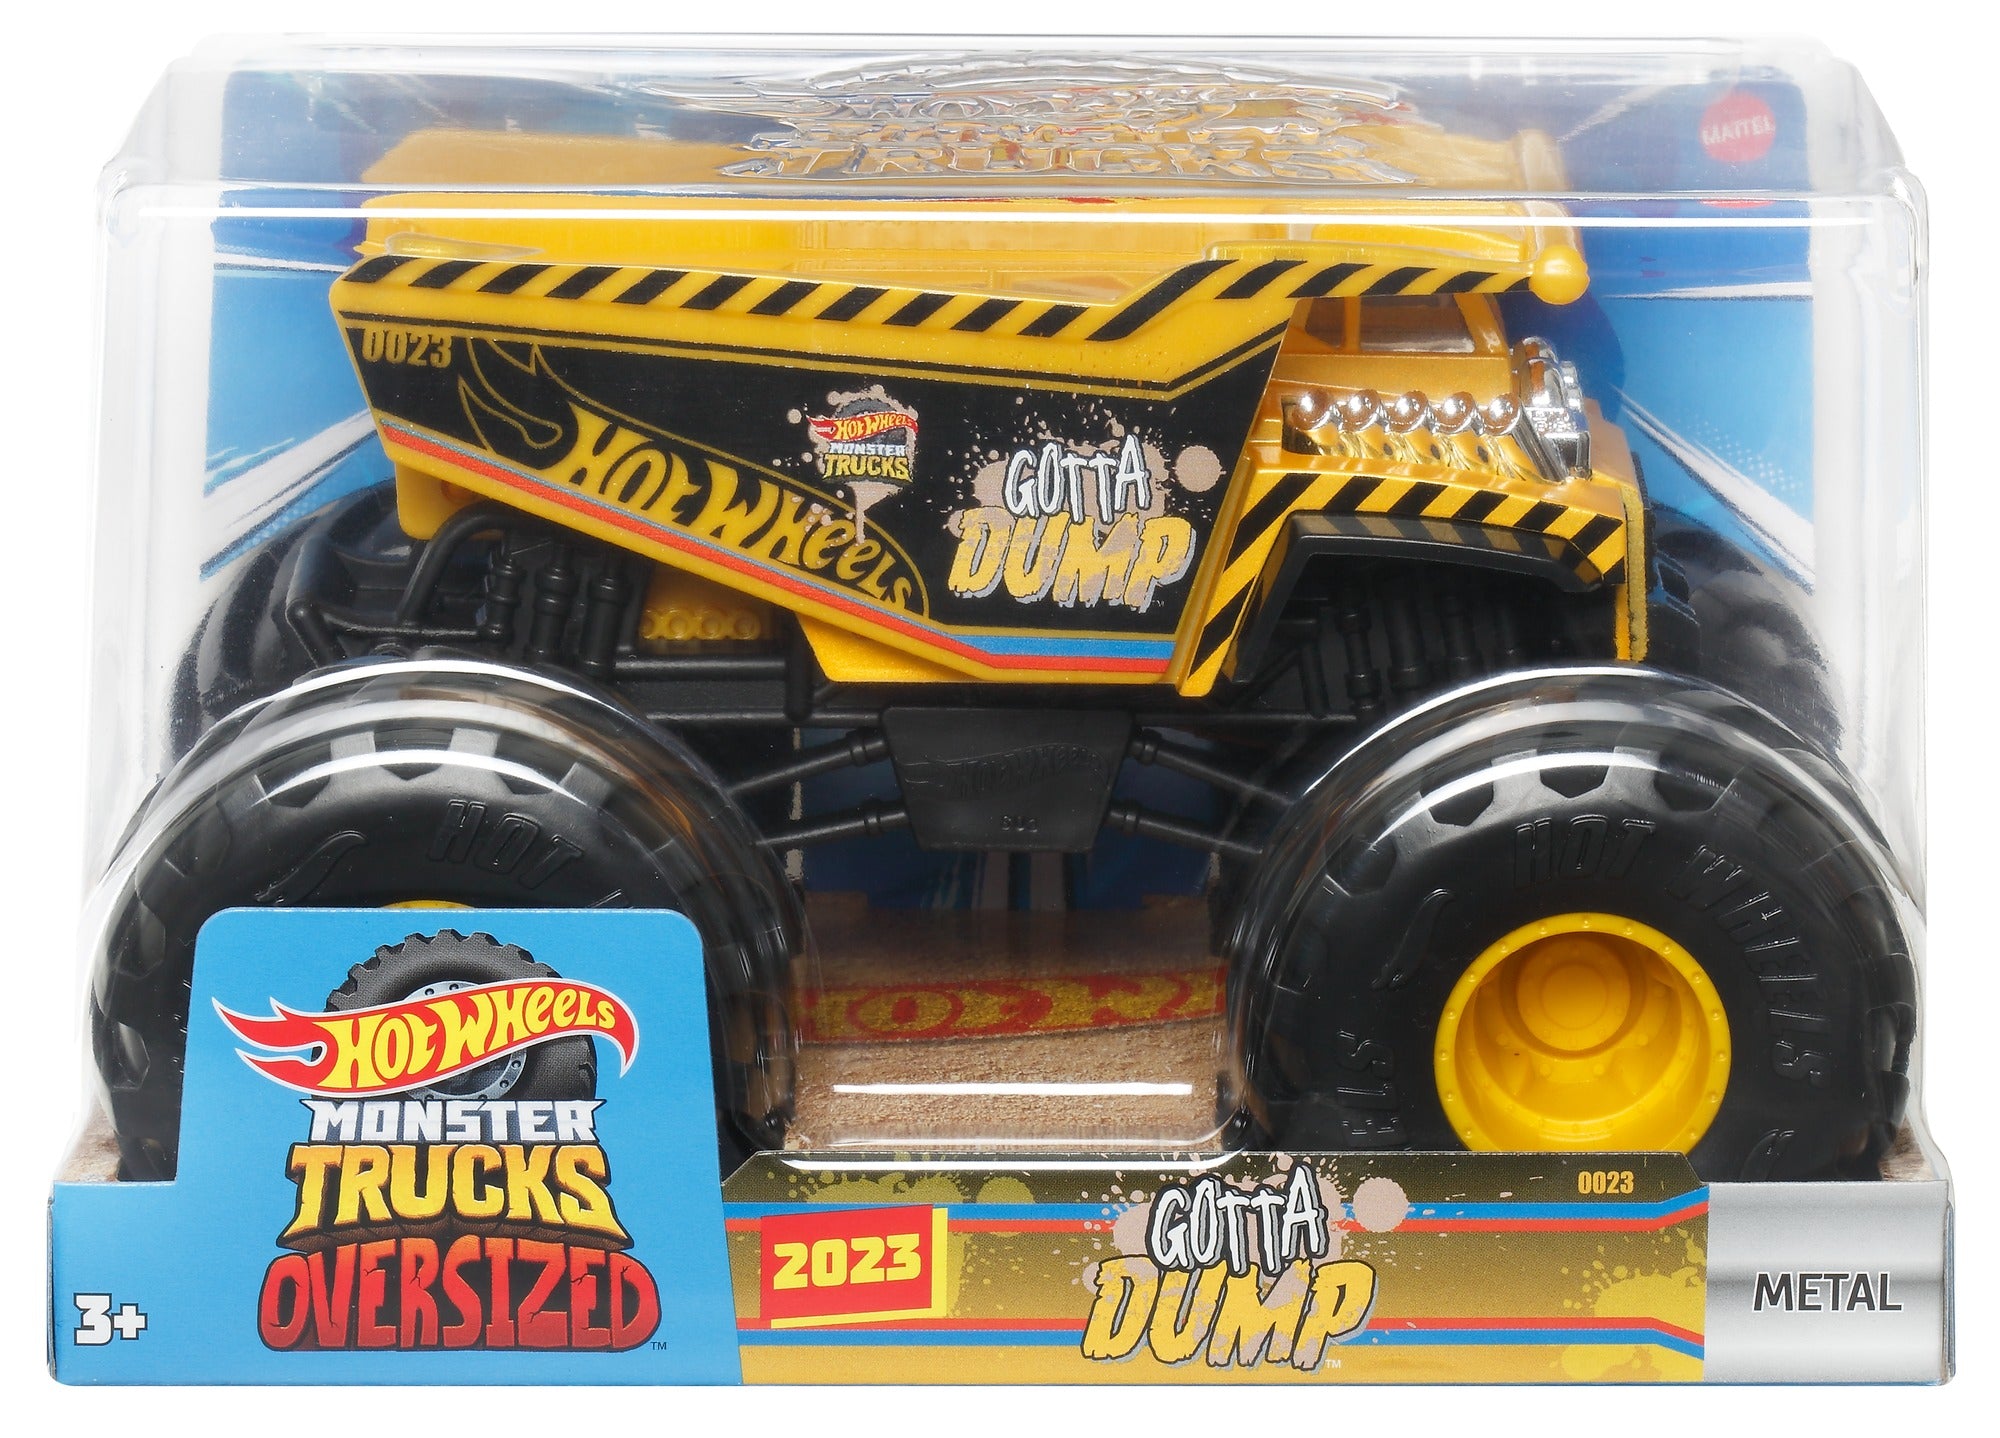 Hot Wheels 1:24 Scale Oversized Monster Truck Gotta Dump Die-Cast Toy Truck with Giant Wheels and Cool Designs